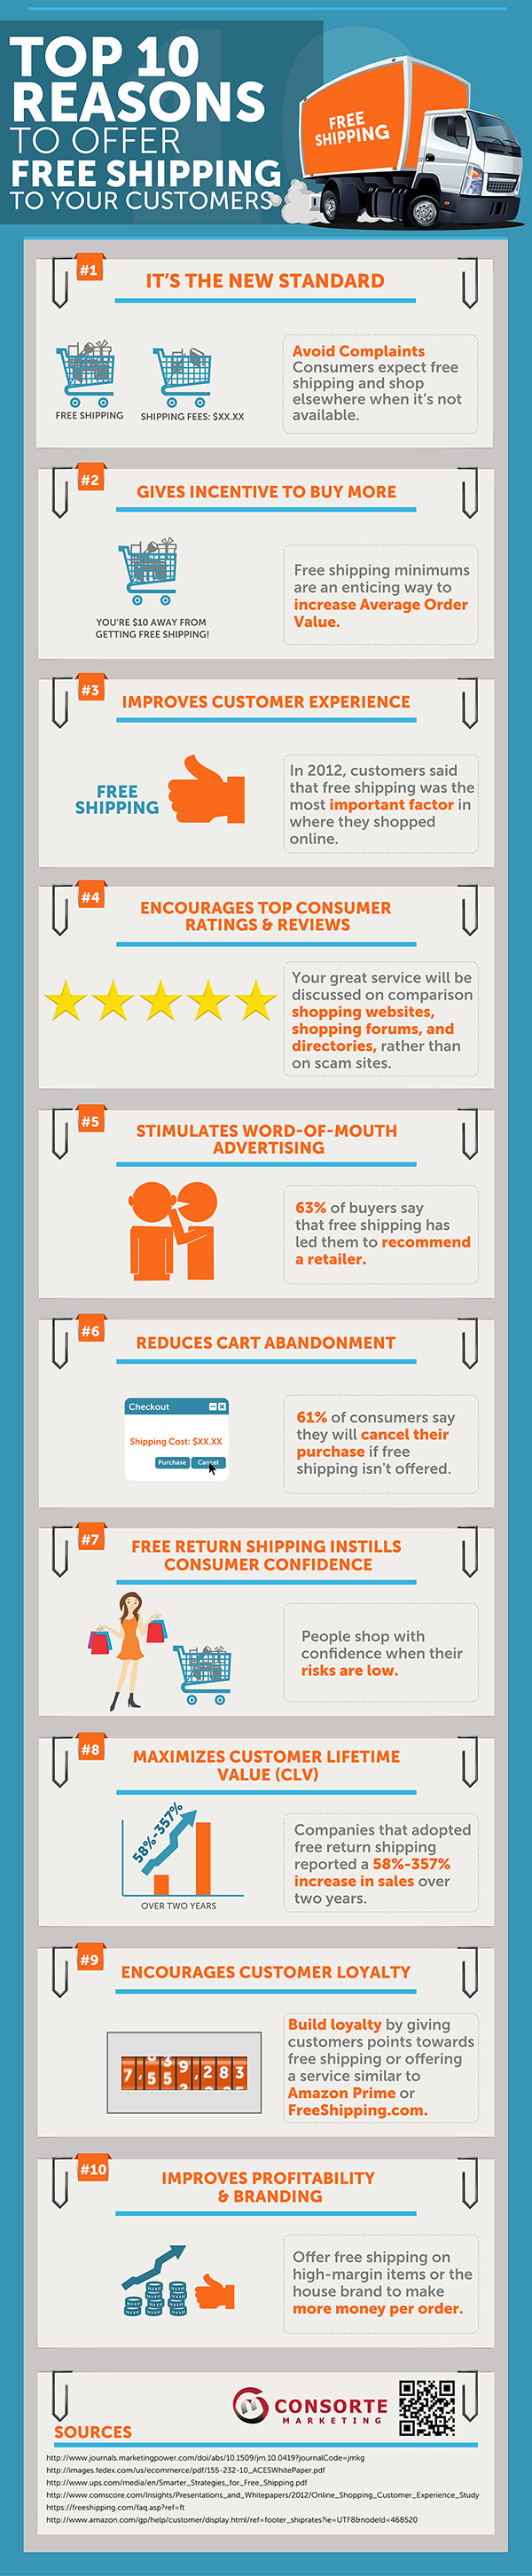 Top 10 Reasons to Offer Free Shipping to Your Customers (Infographic)